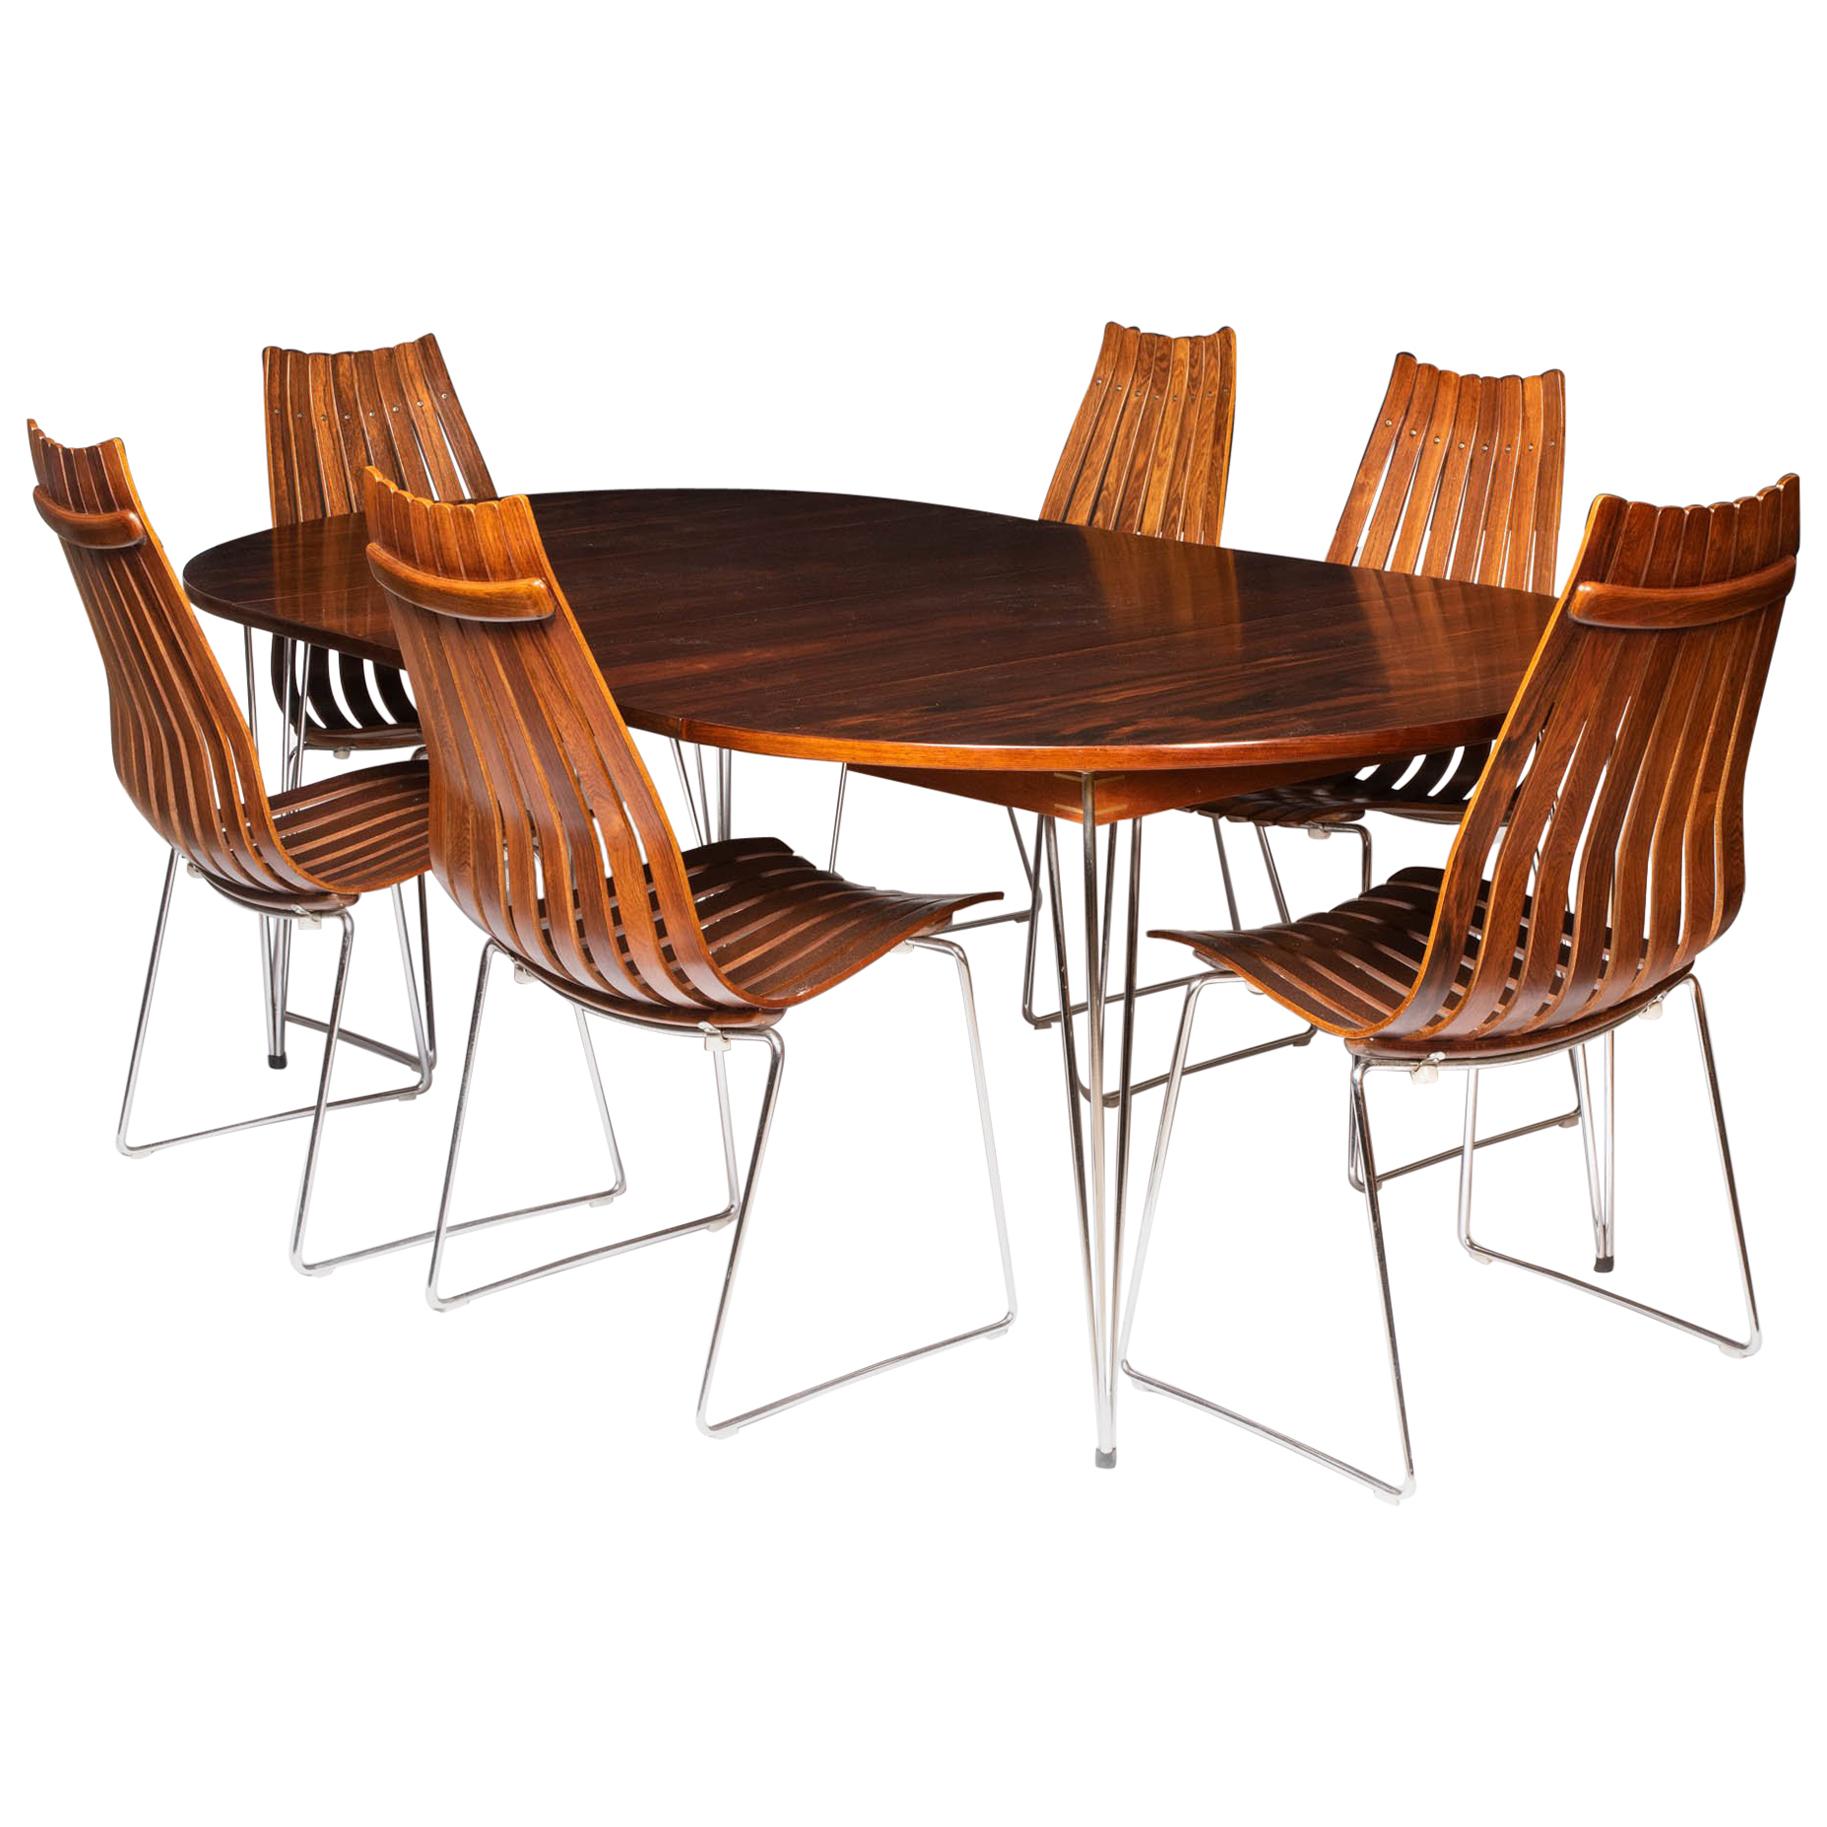 Rosewood Dining Table and 6 Dining Chairs by Hans Brattrud, Norway, circa 1957